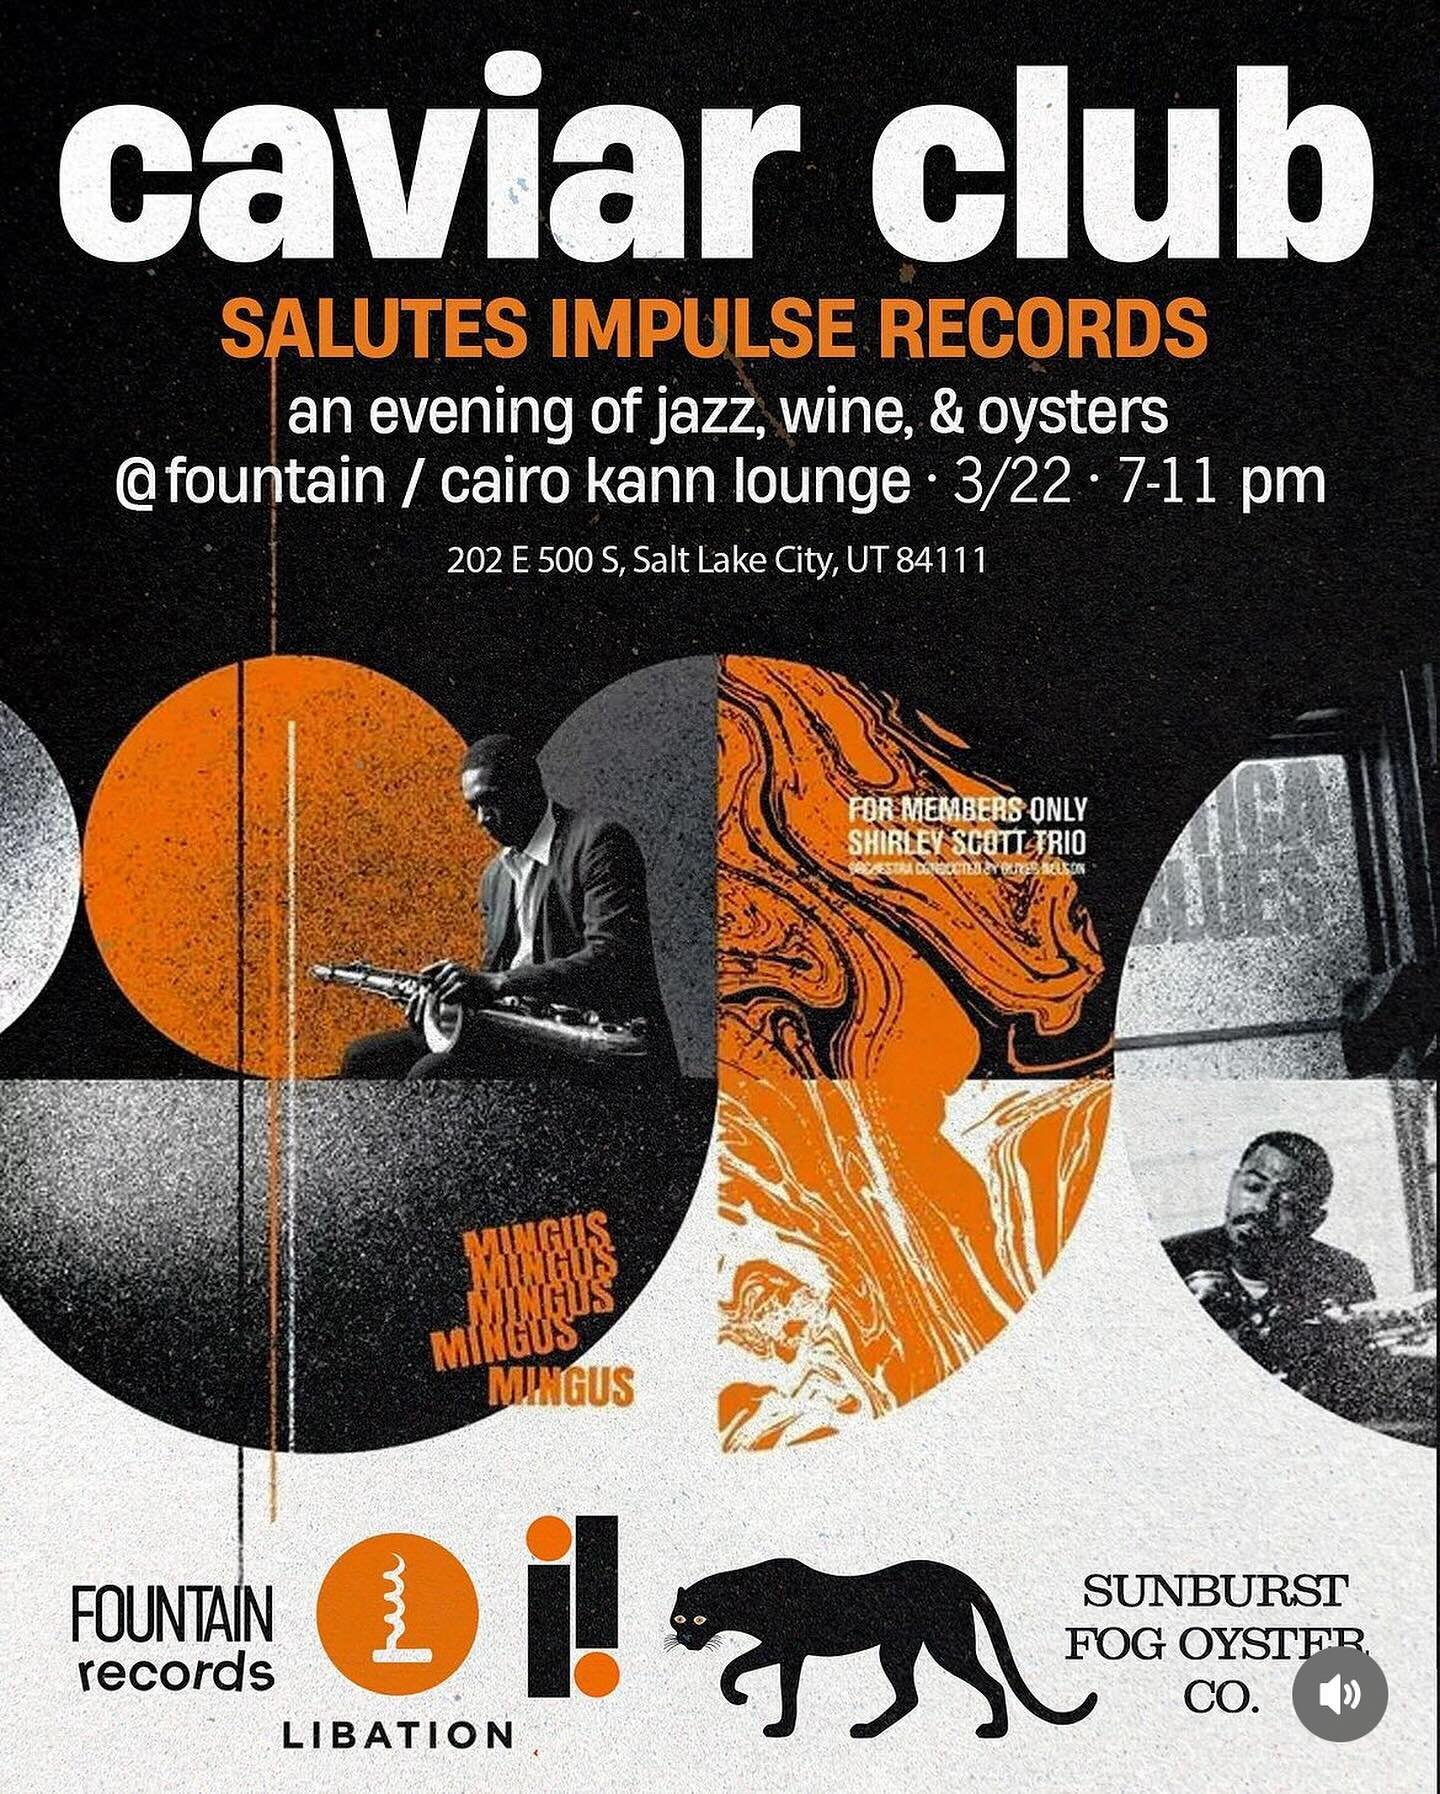 Announcing our next @cvrclb installment! This month we&rsquo;re celebrating with a special evening of warm analog jazz nuggets compiled from the classic Impulse! record label. In addition to the curated vinyl selections played on our custom hi-fi set